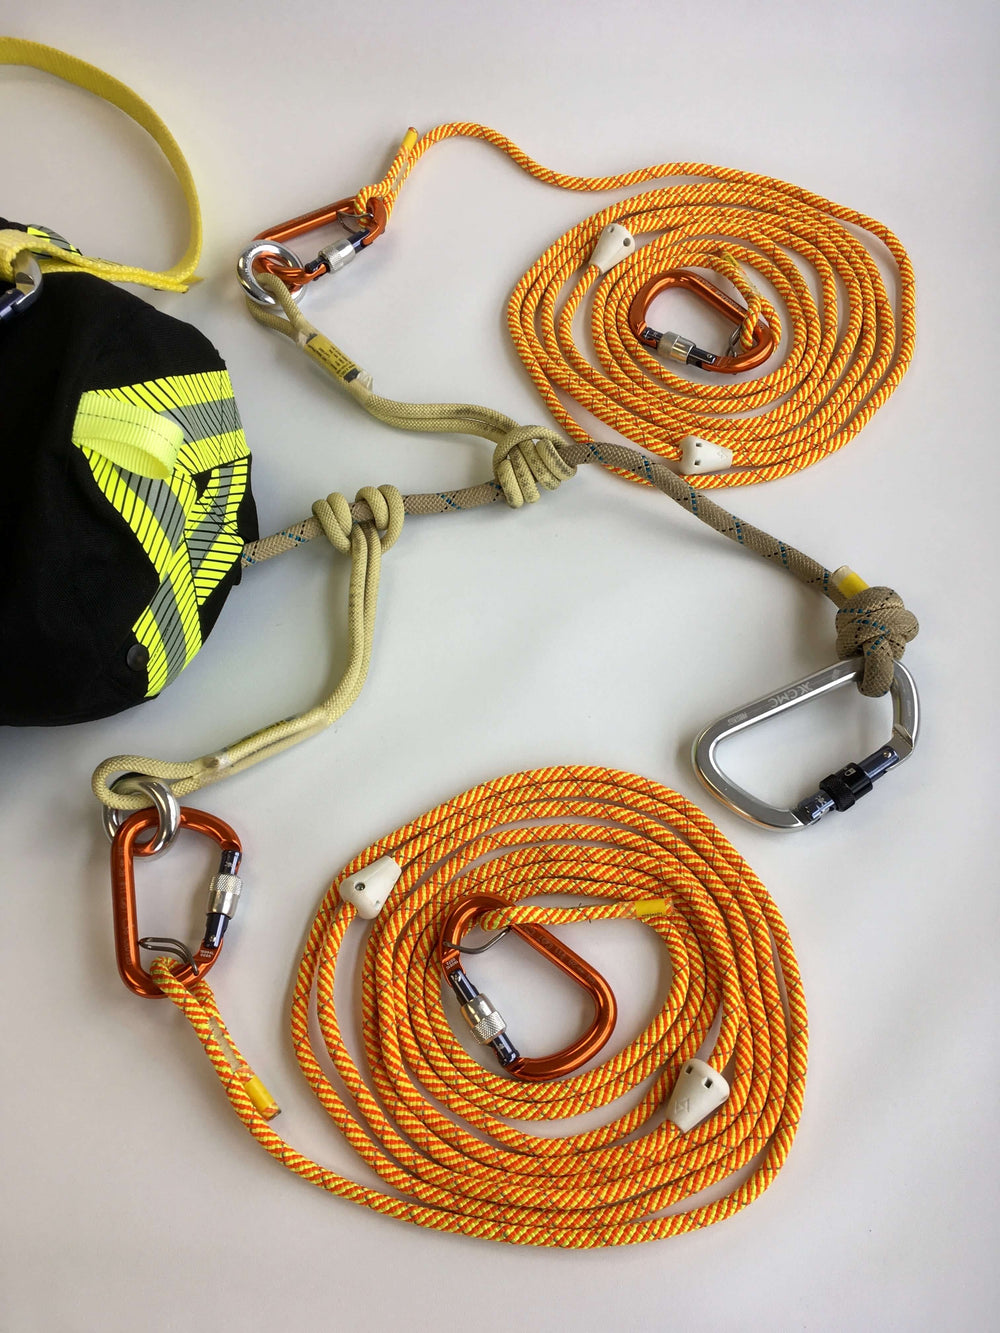 Anderson Rescue Solutions Fireground Special Operations Rescue and Search kit ropes